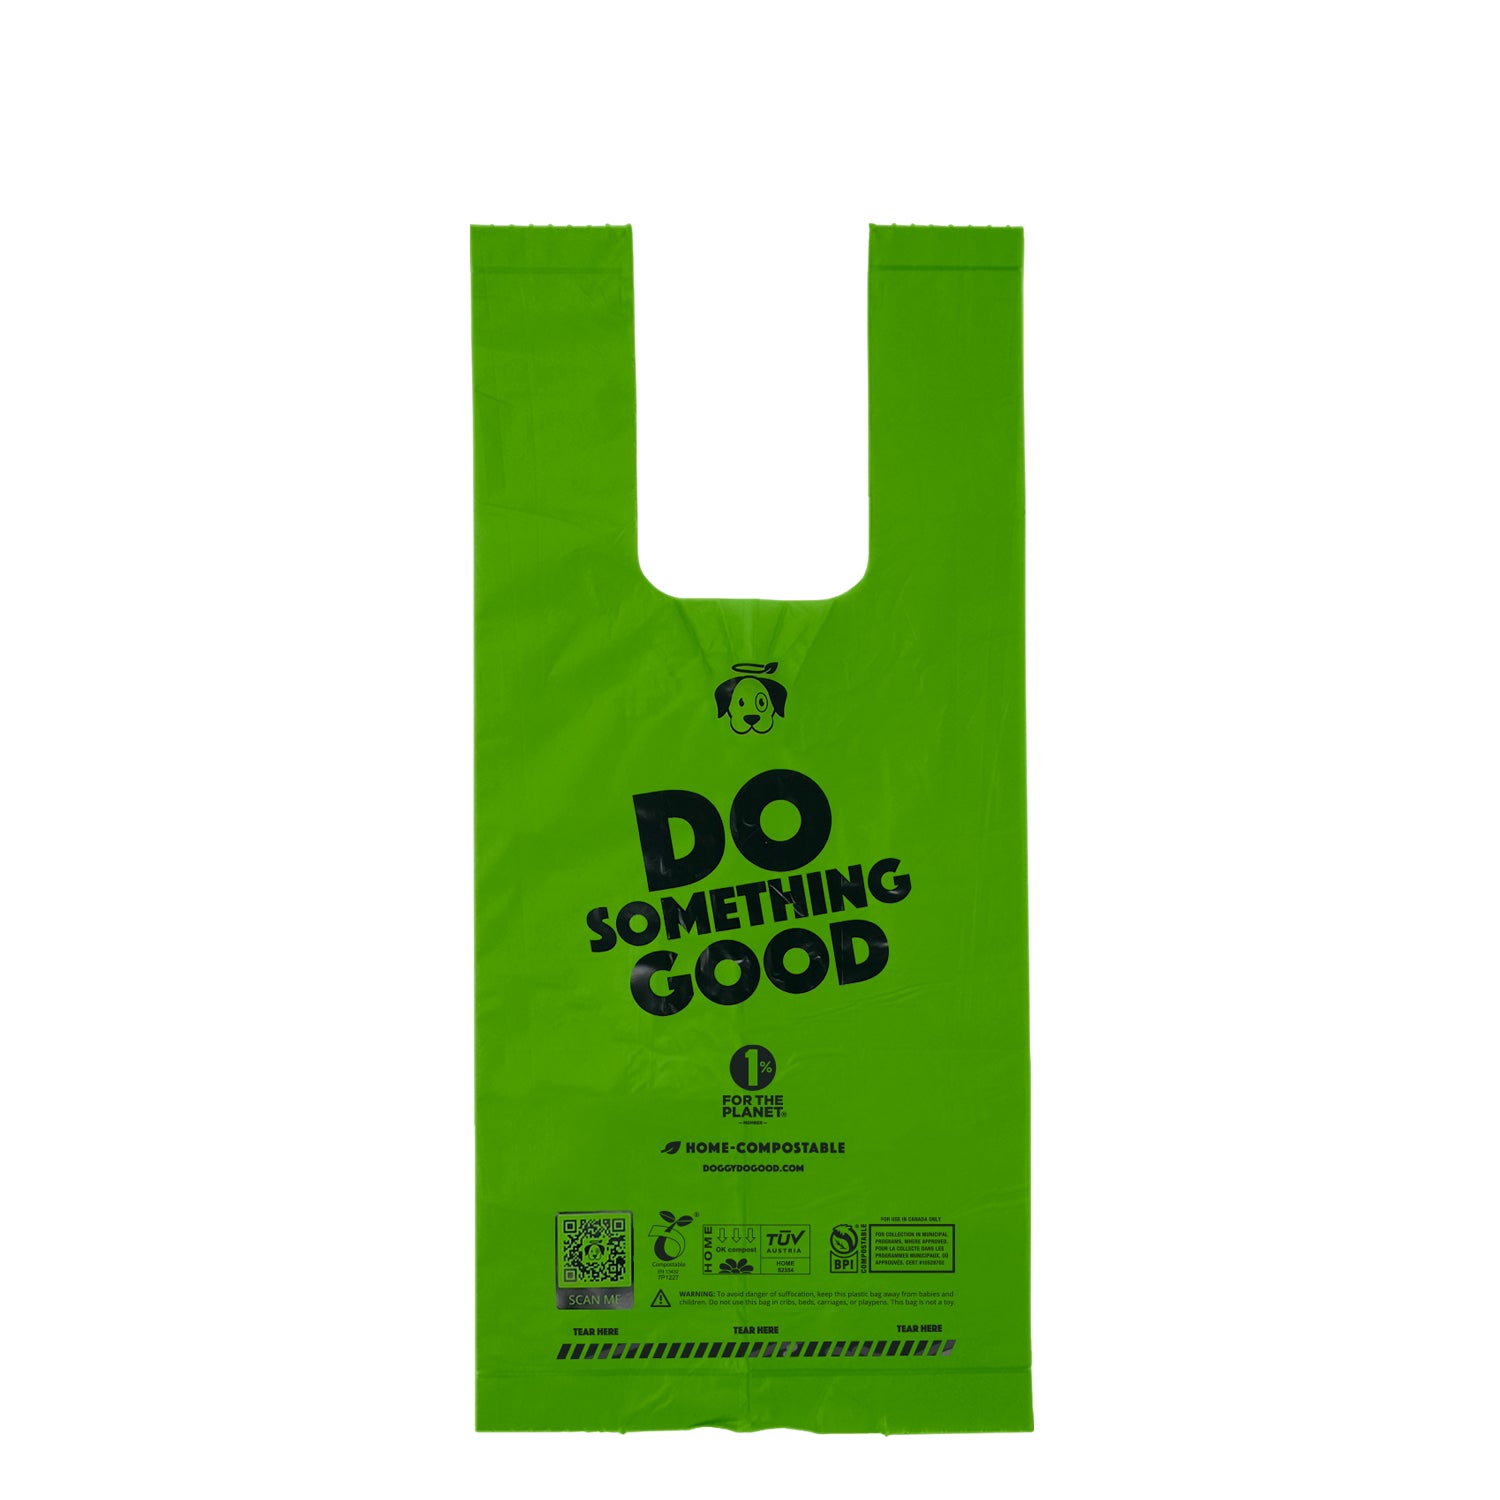 Home Compostable Small Rolled Handle Bags (60 Bags)